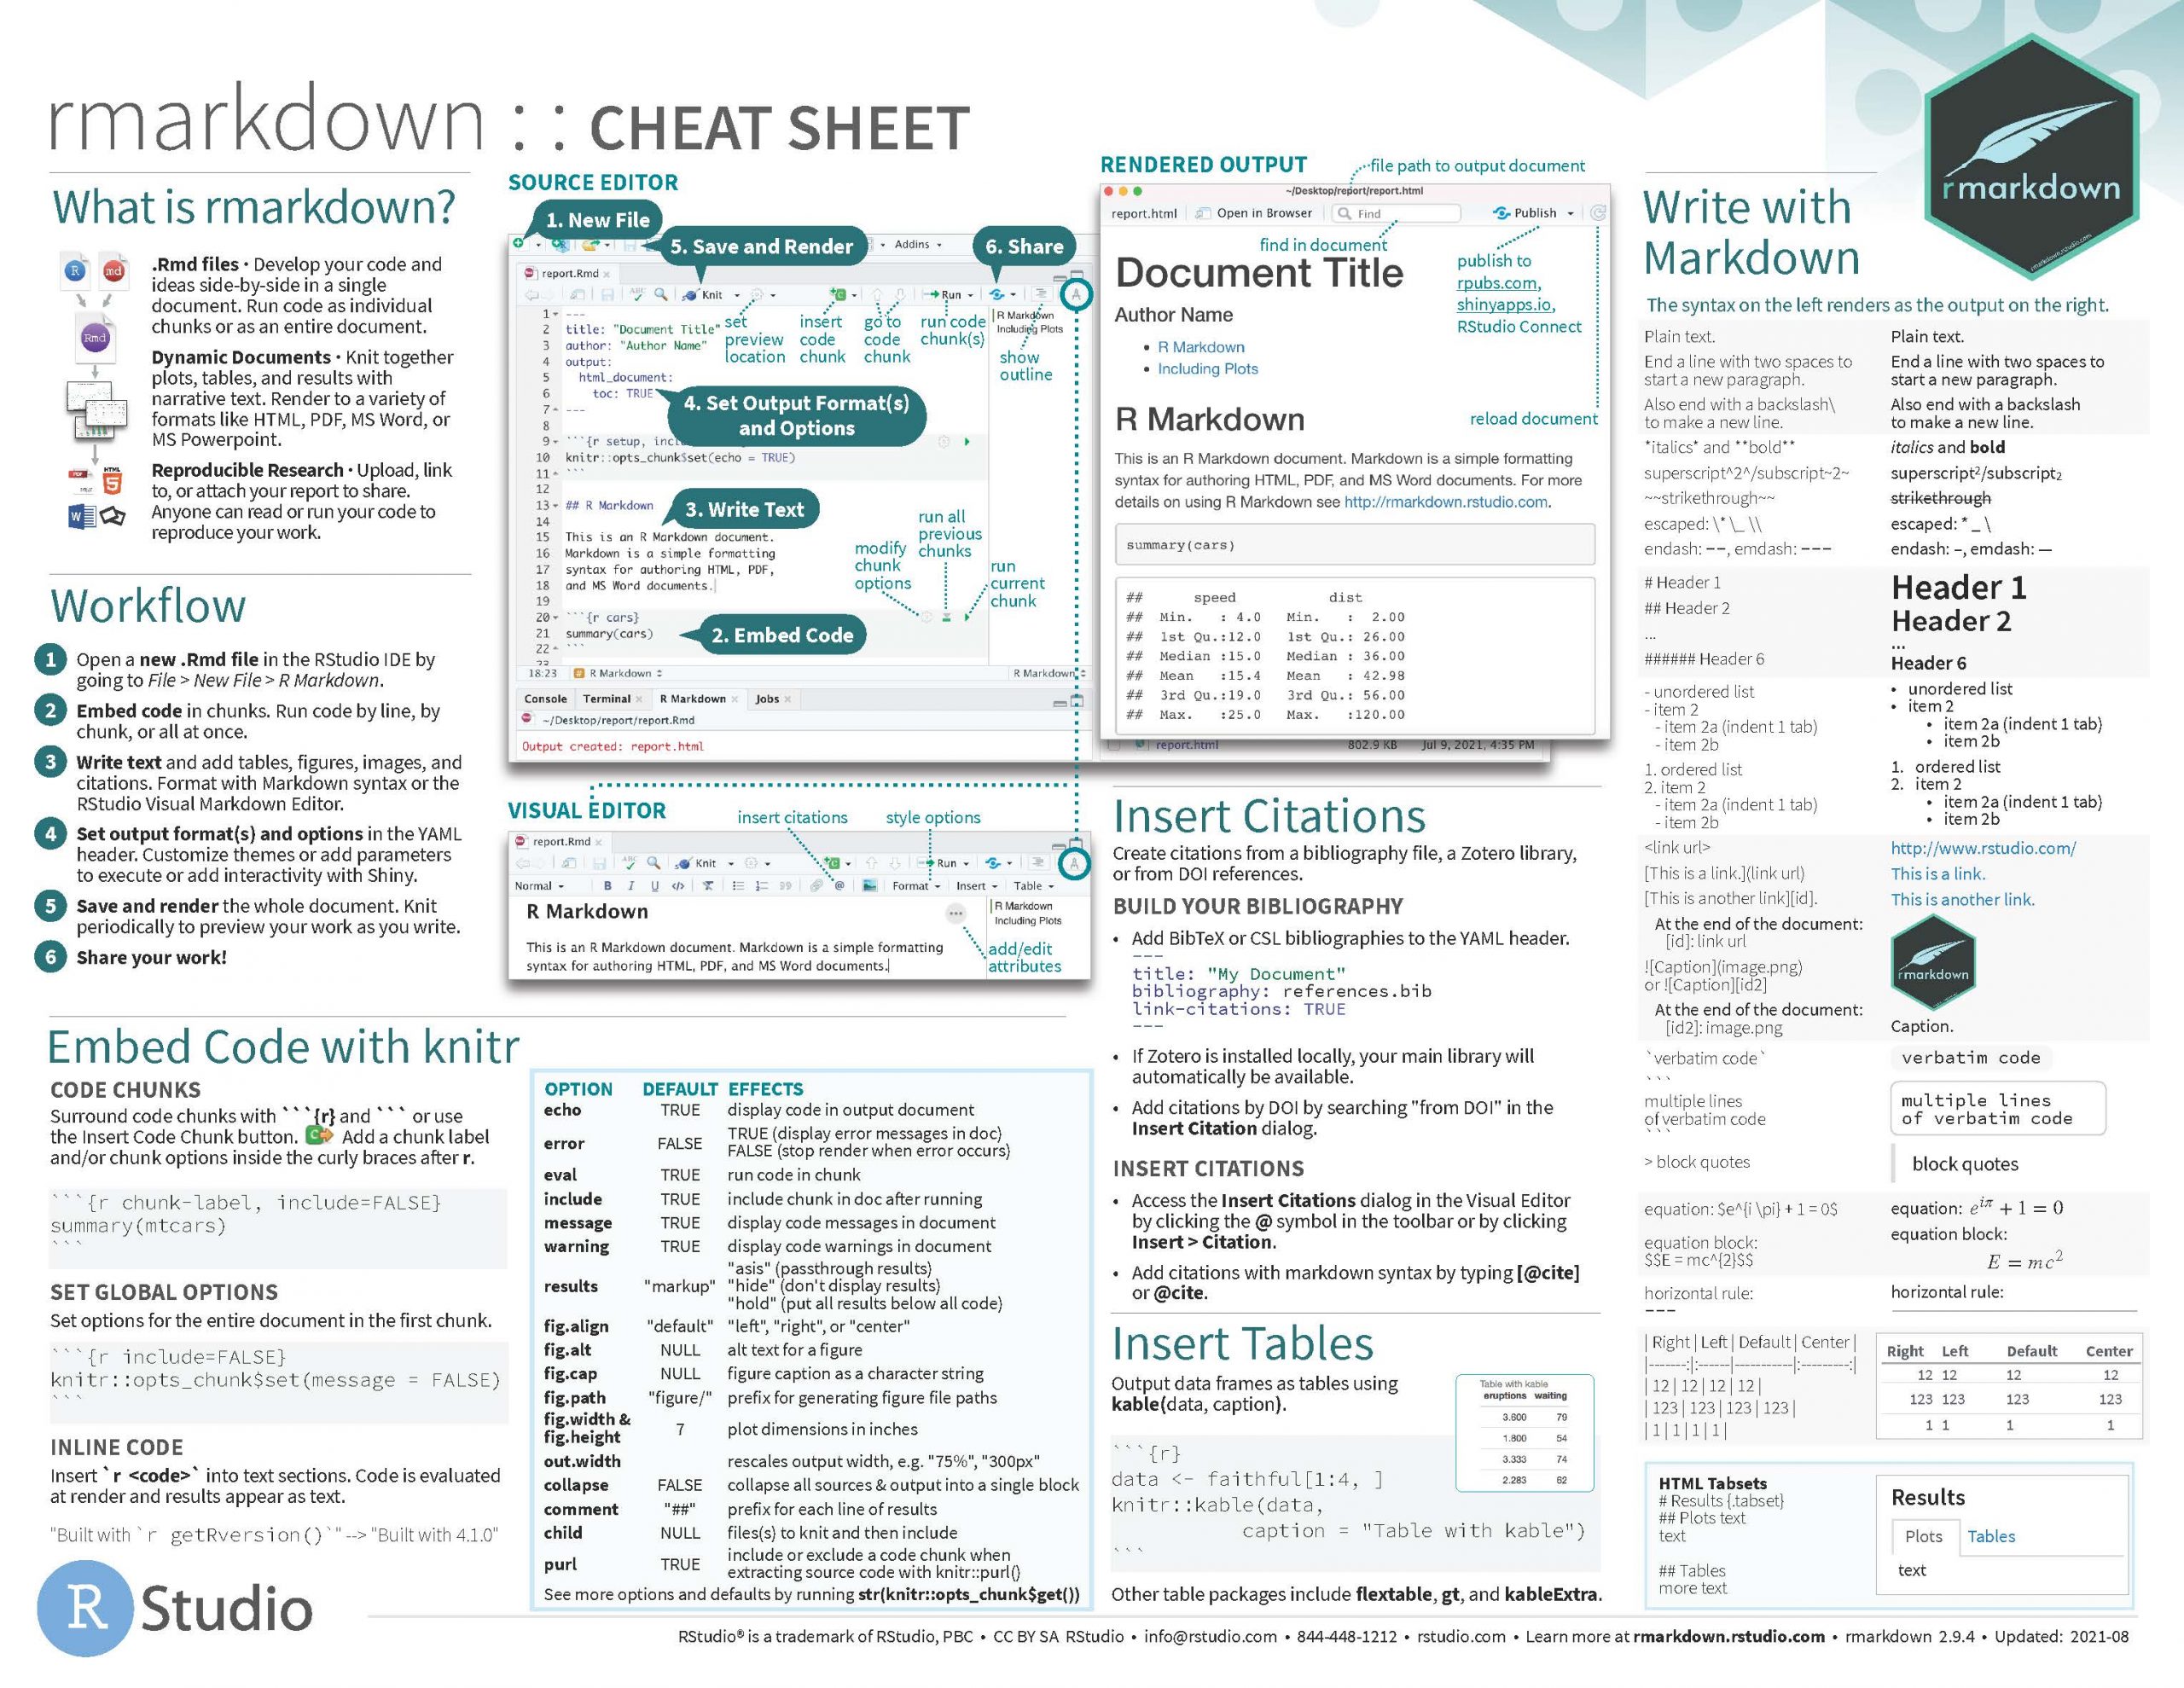 RMarkdown cheatsheet with key commands and options